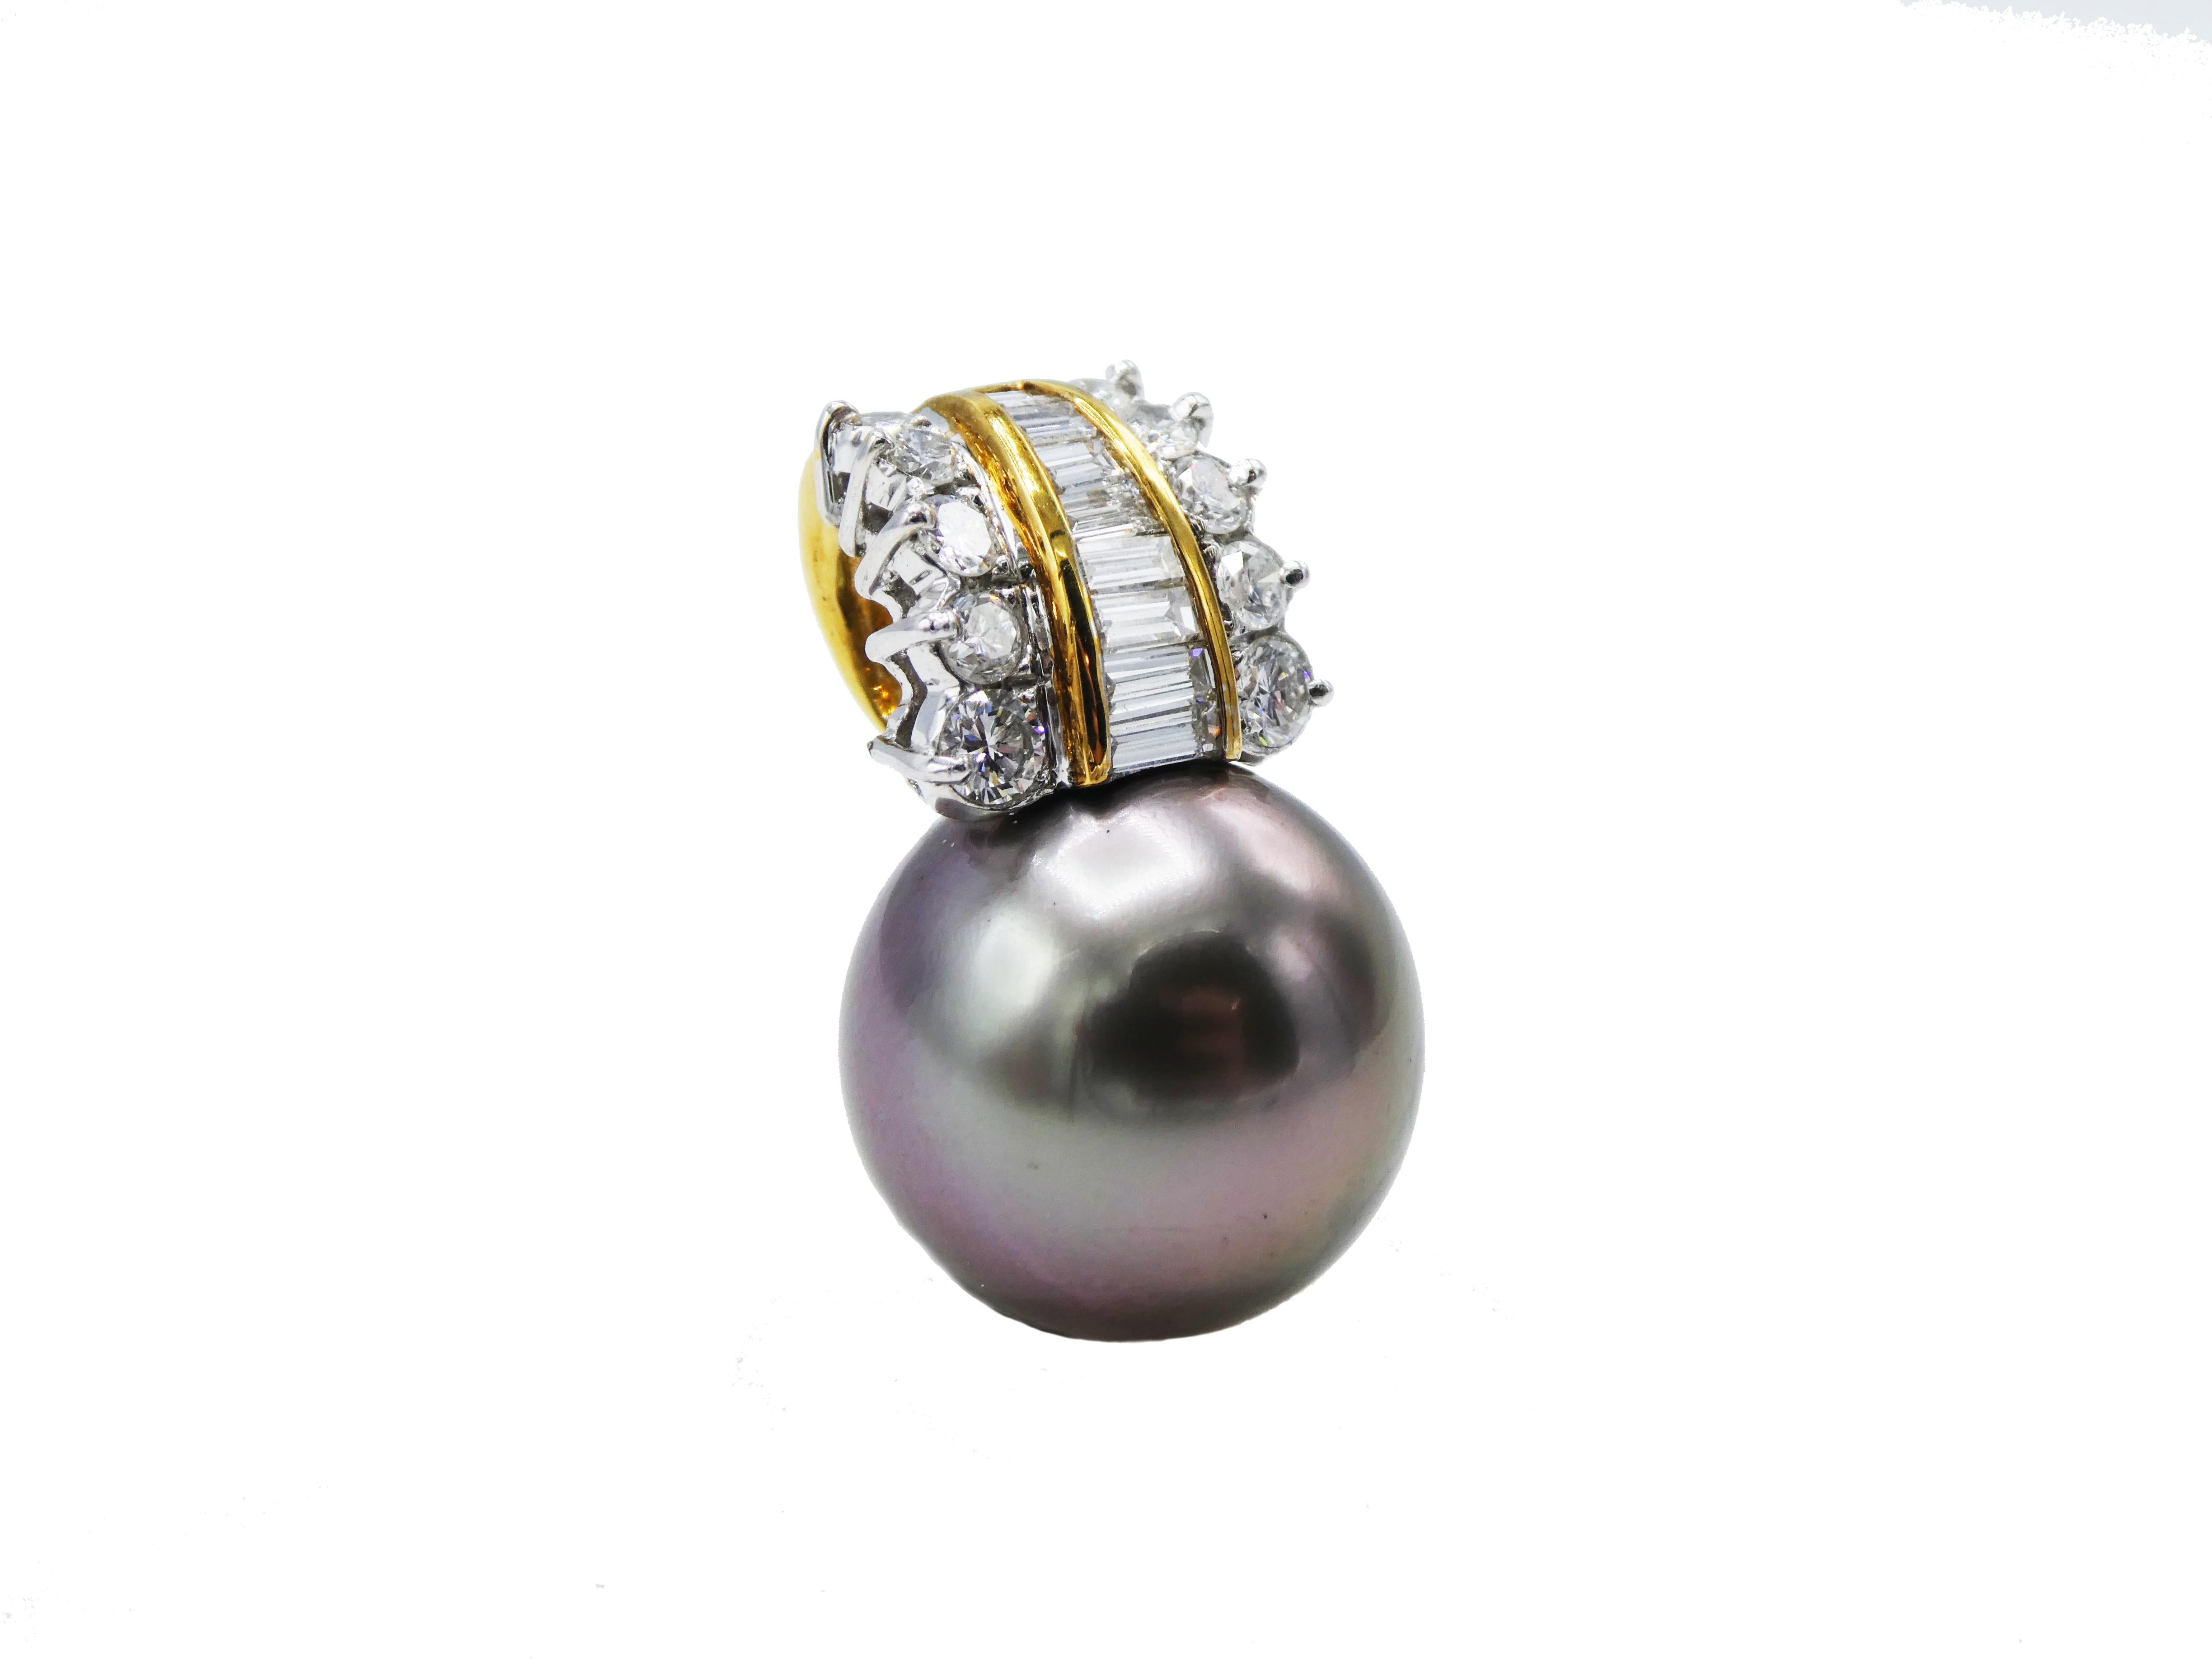 18 Karat Yellow Gold Tahitian Pearl & 1 CTW Diamond Pendant
Metal: 18 karat yellow gold
Weight: 7.13 grams
Diamonds: Round & baguette diamonds, approx. 1 CTW G VS
Length: 23MM
Width: 14MM
Pearl: Cultured gray Tahitian 14MM 
*Pendant only, does not